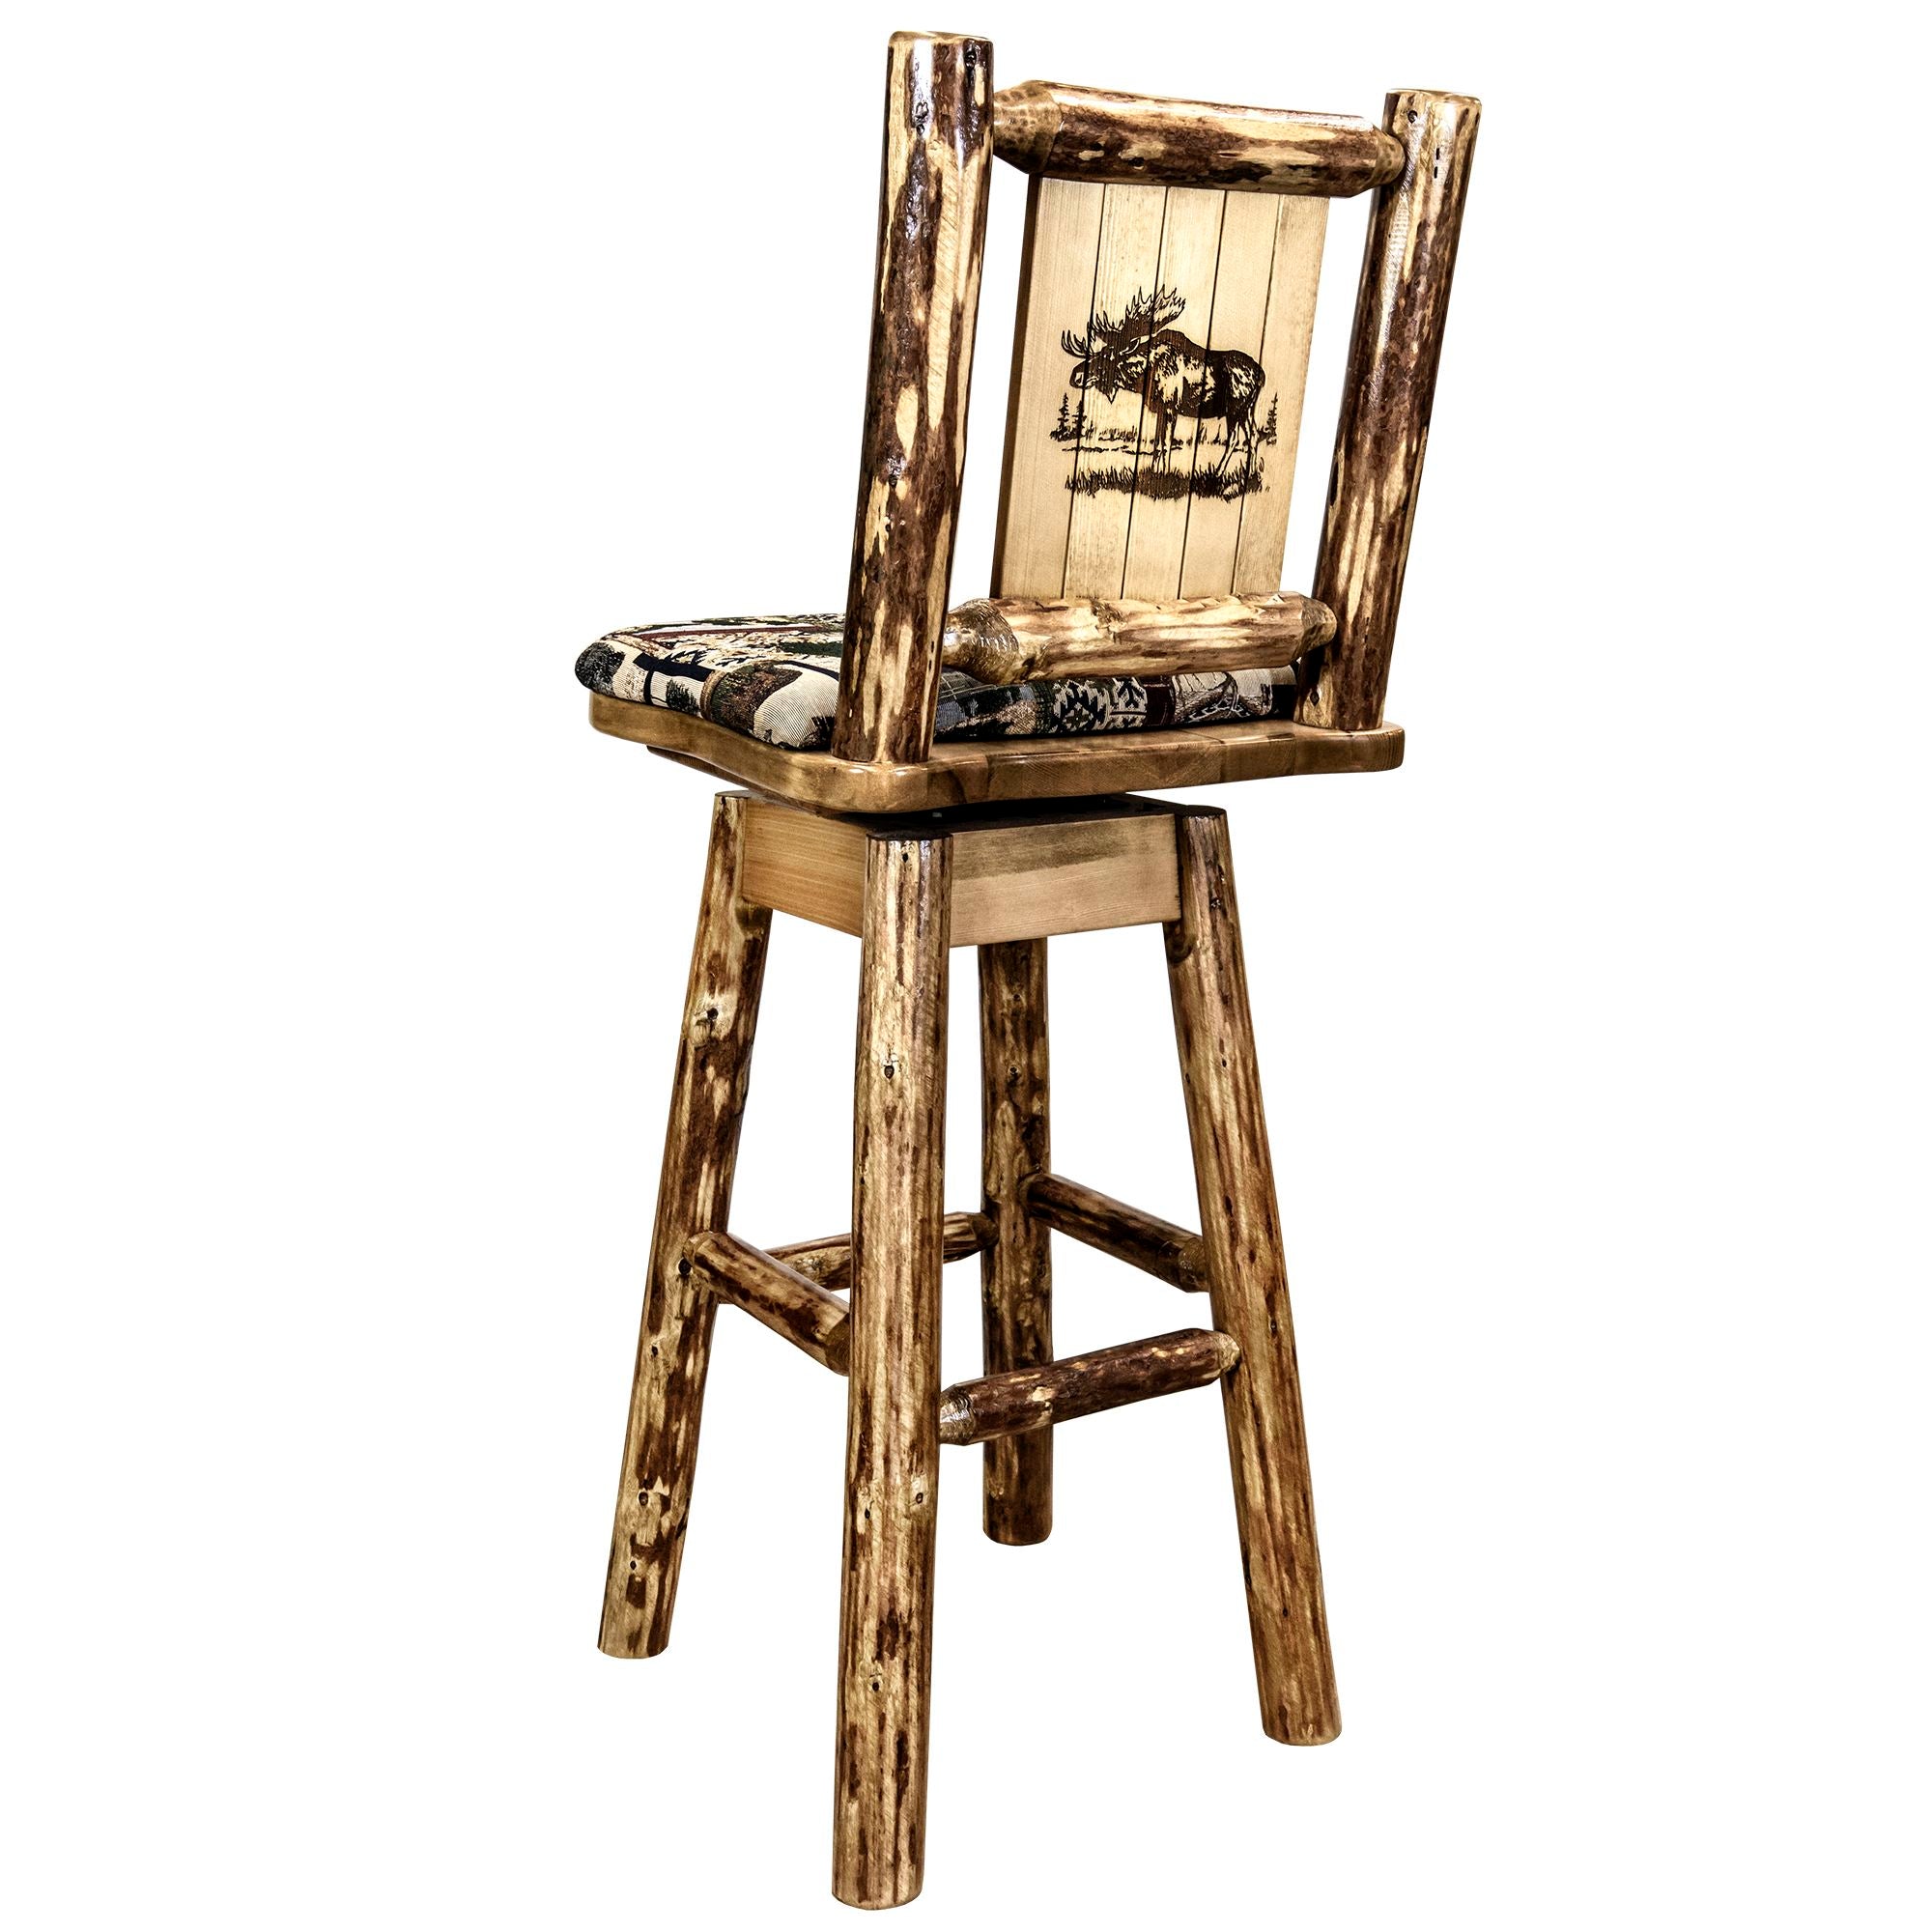 montana glacier country collection barstool with back swivel woodland pattern upholstery with laser engraved moose design mwgcbswsnrwoodlmoose